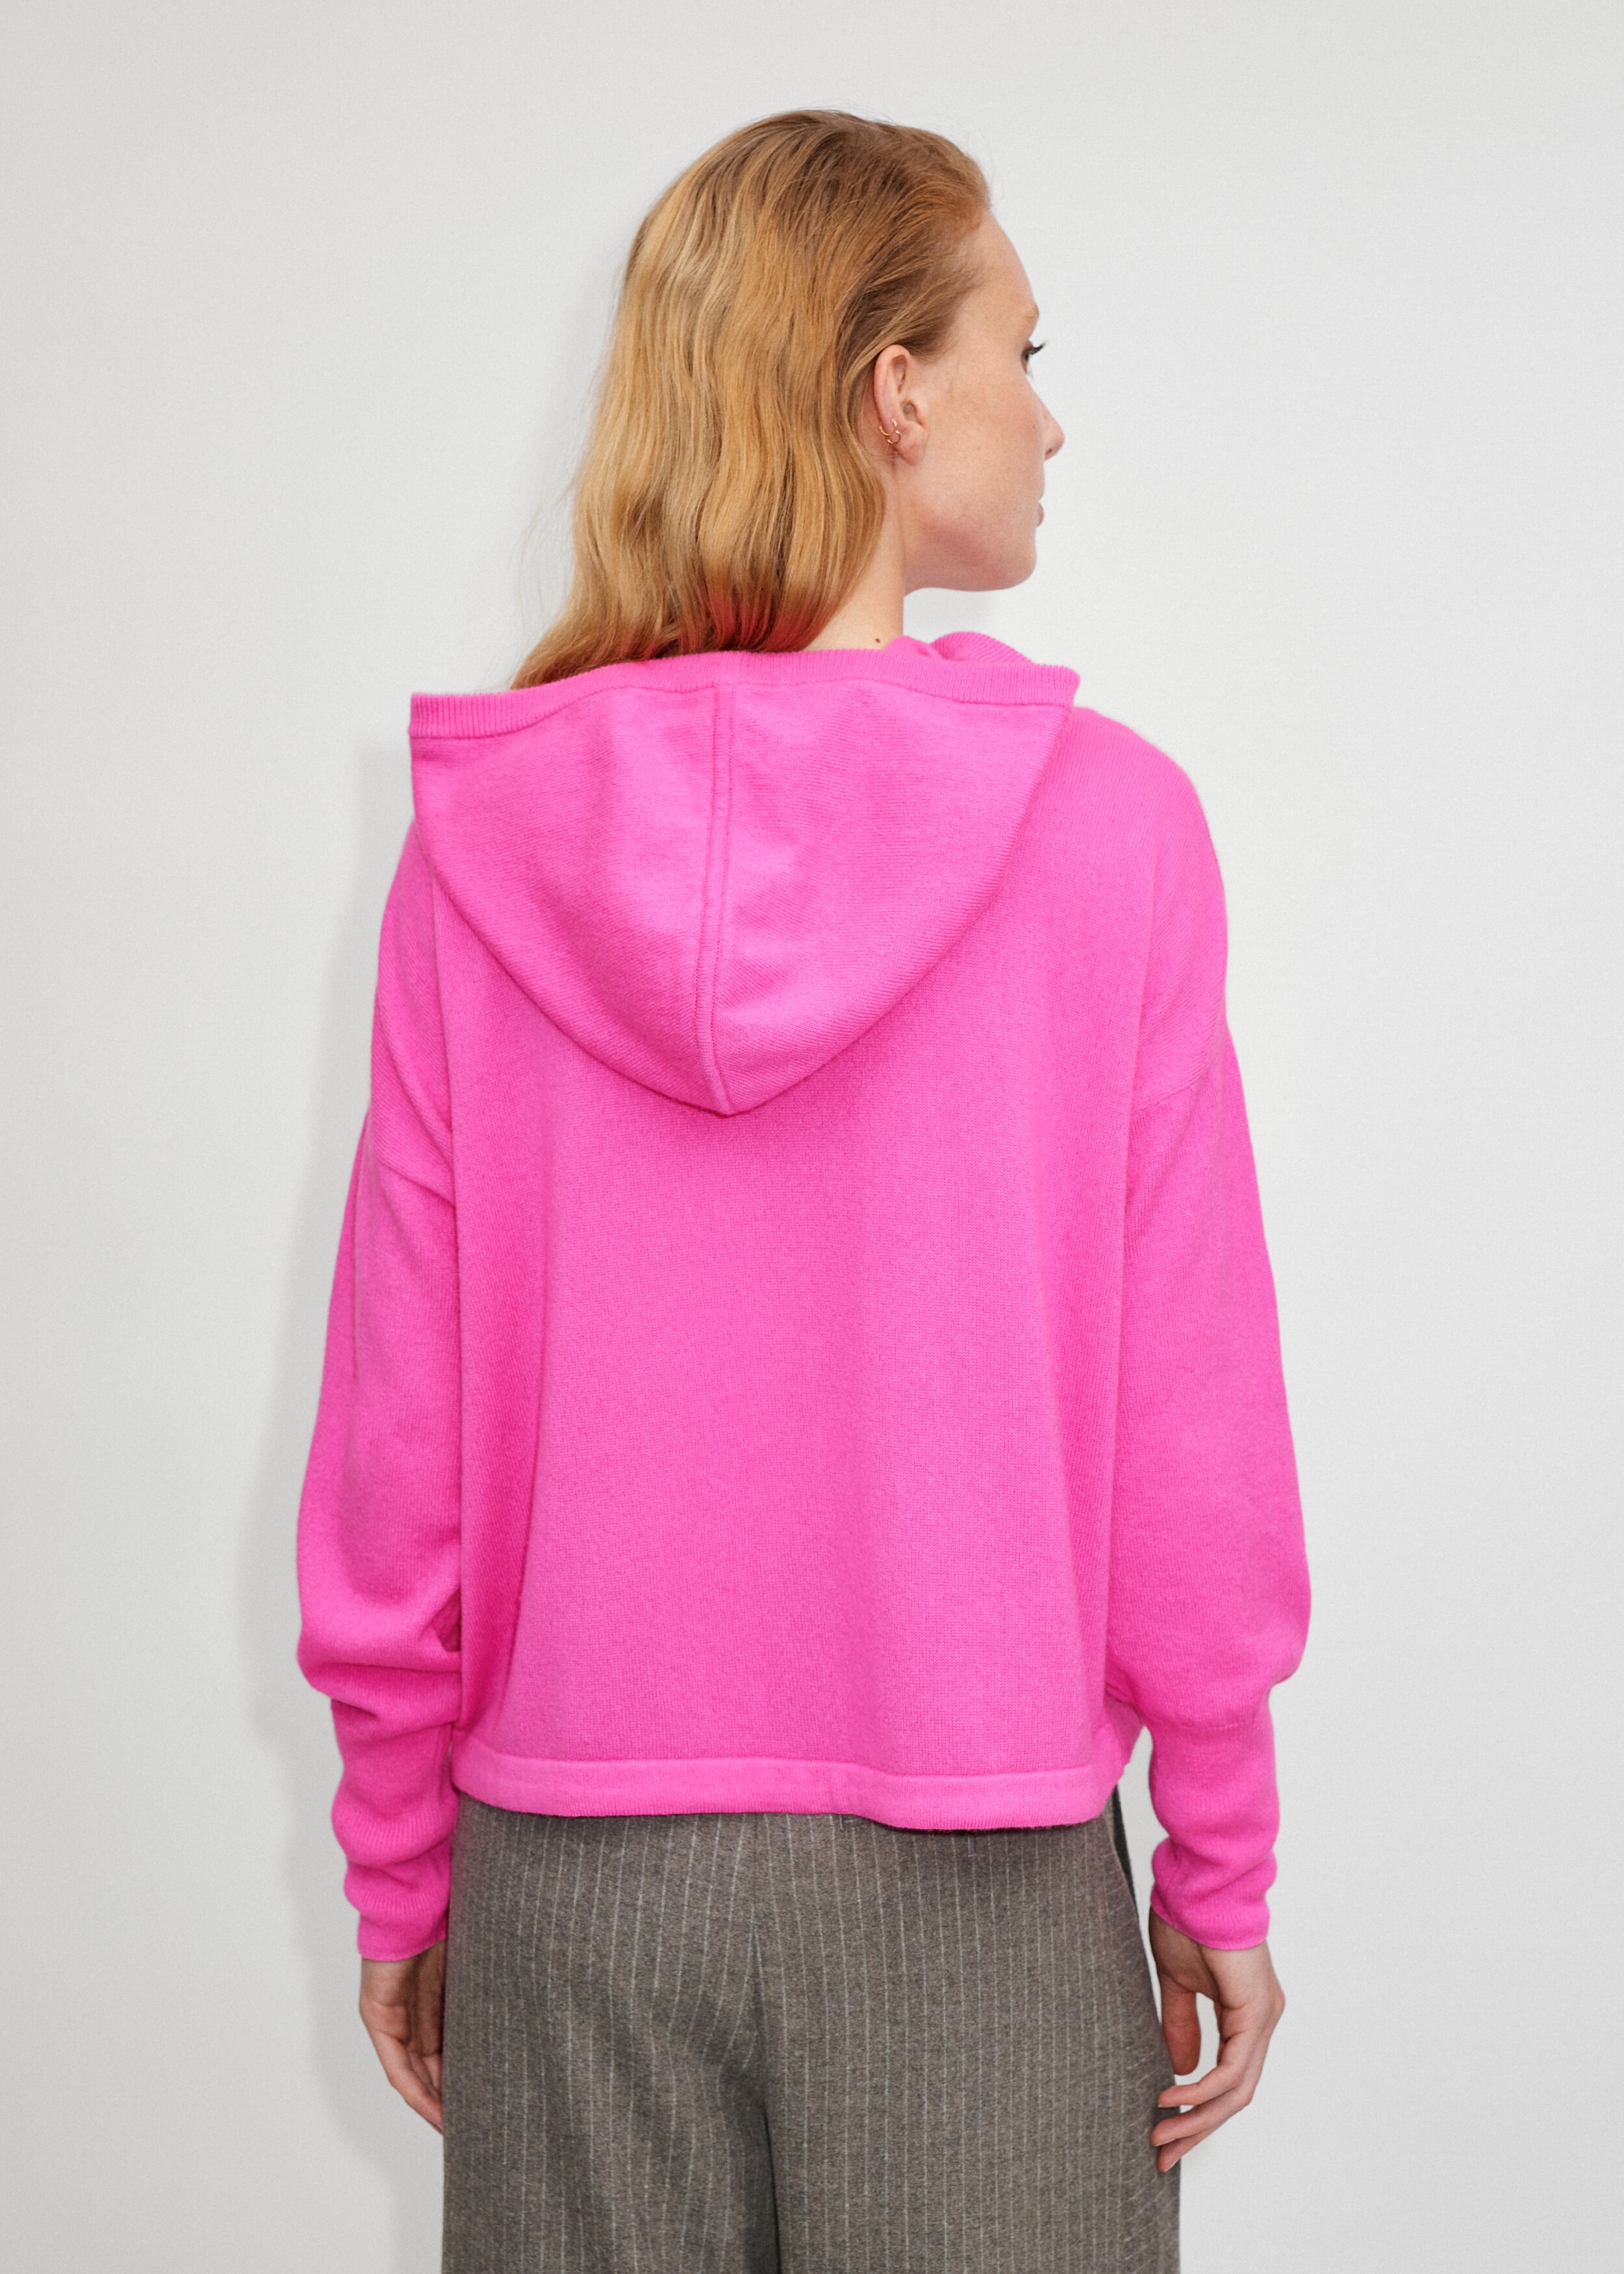 Inside-Out Cashmere Hoodie - Ready-to-Wear 1A7XPO